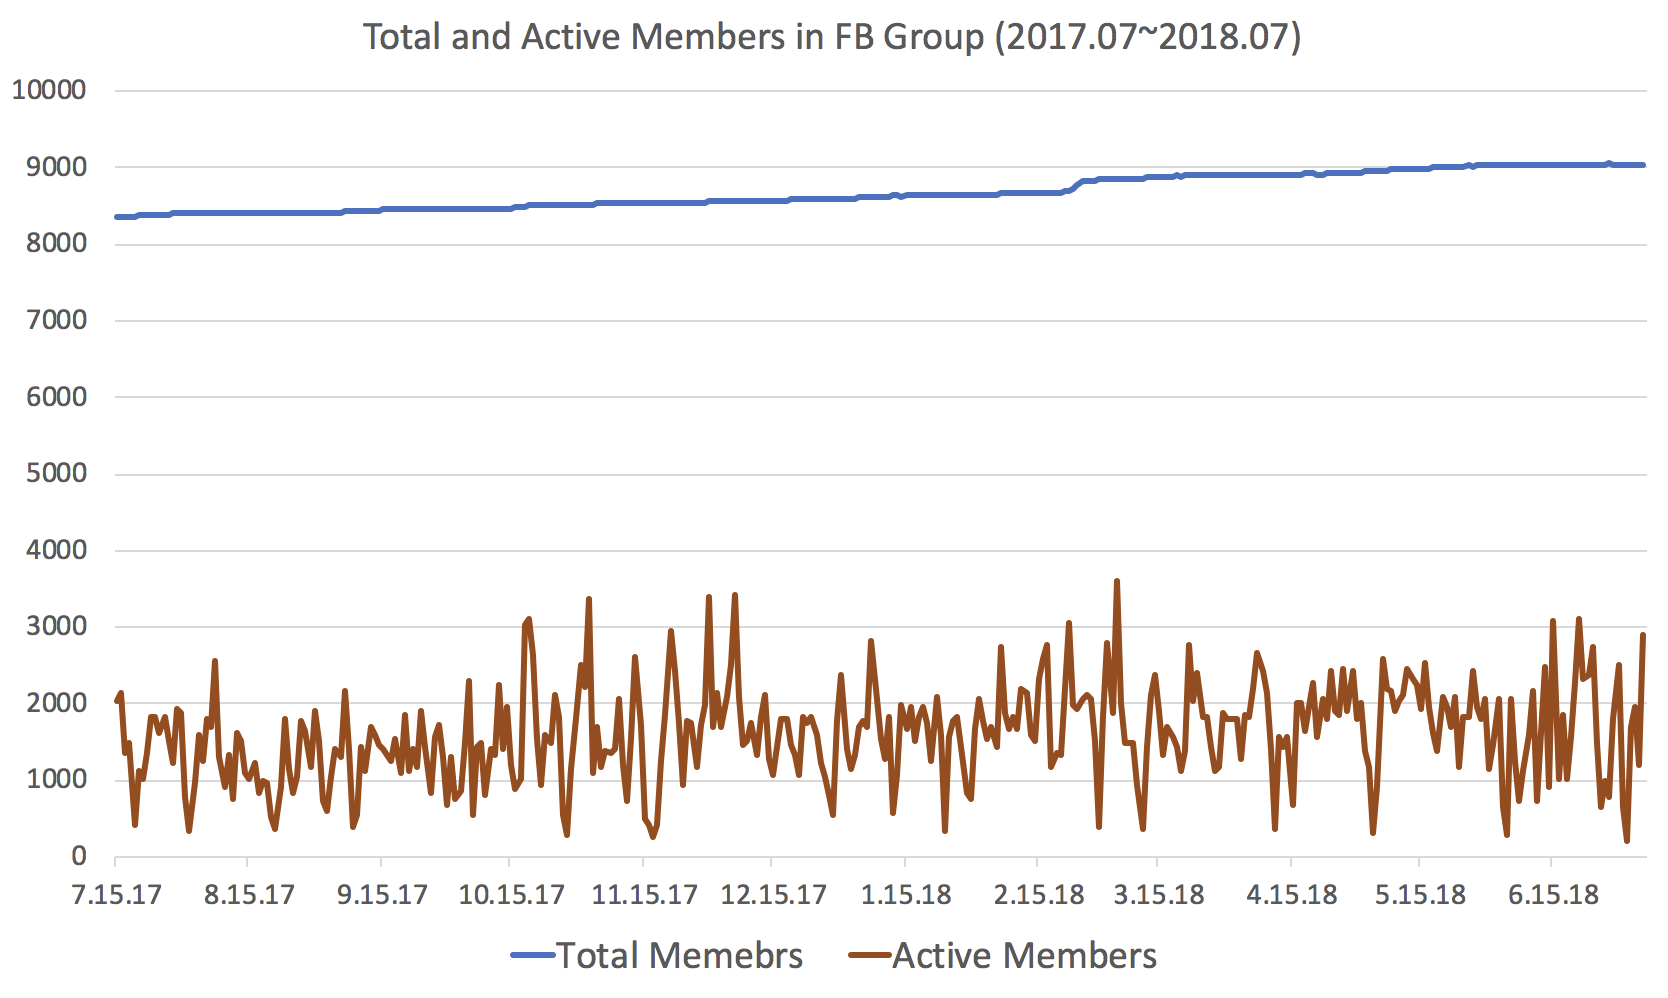 Total & Active Members in Facebook Group for last 1 year